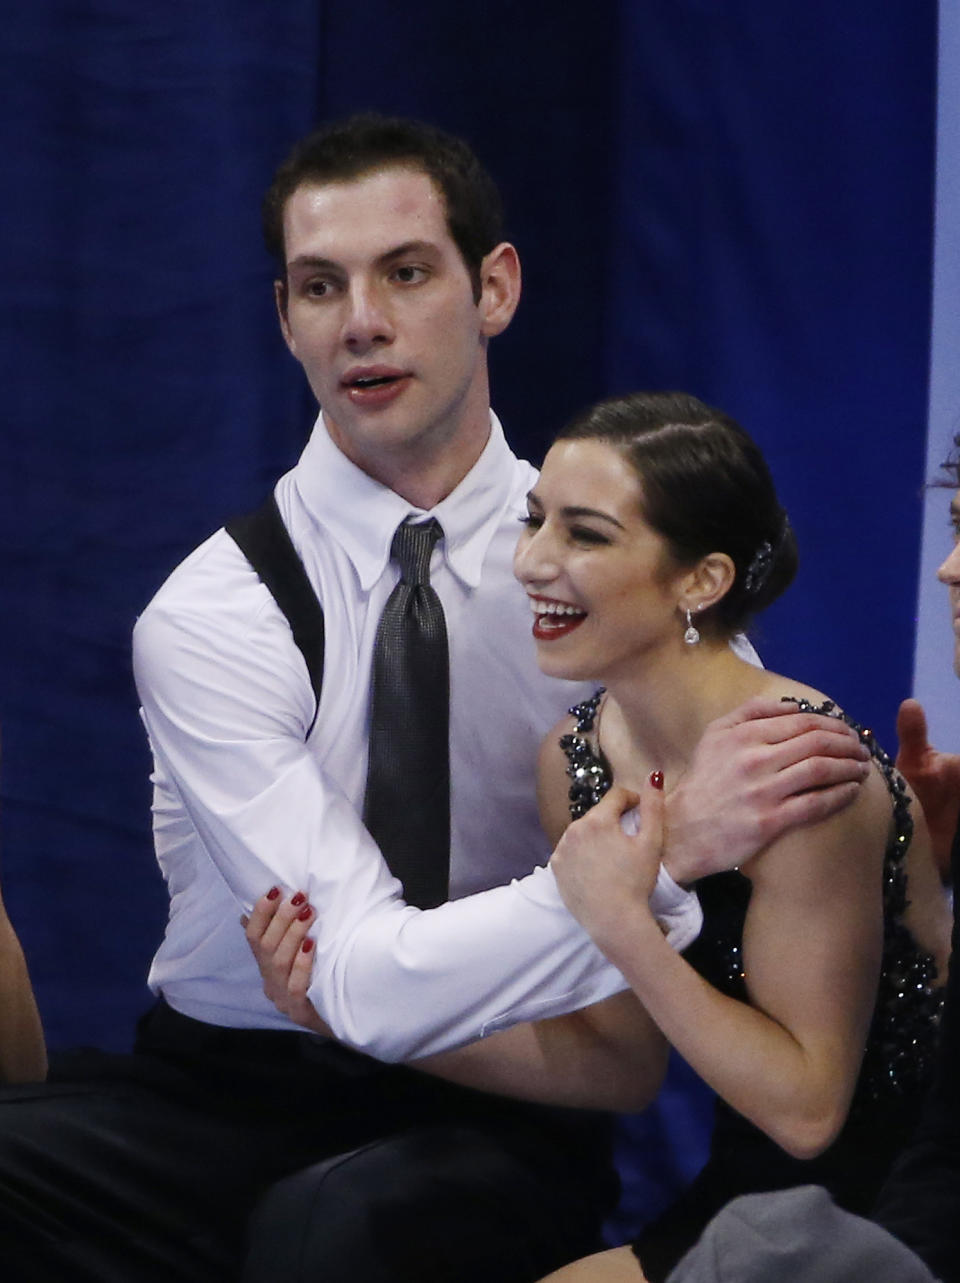 Marissa Castelli and Simon Shnapir react as scores are posted after skating in the pairs free skate at the U.S. Figure Skating Championships in Boston, Saturday, Jan. 11, 2014. (AP Photo/Elise Amendola)